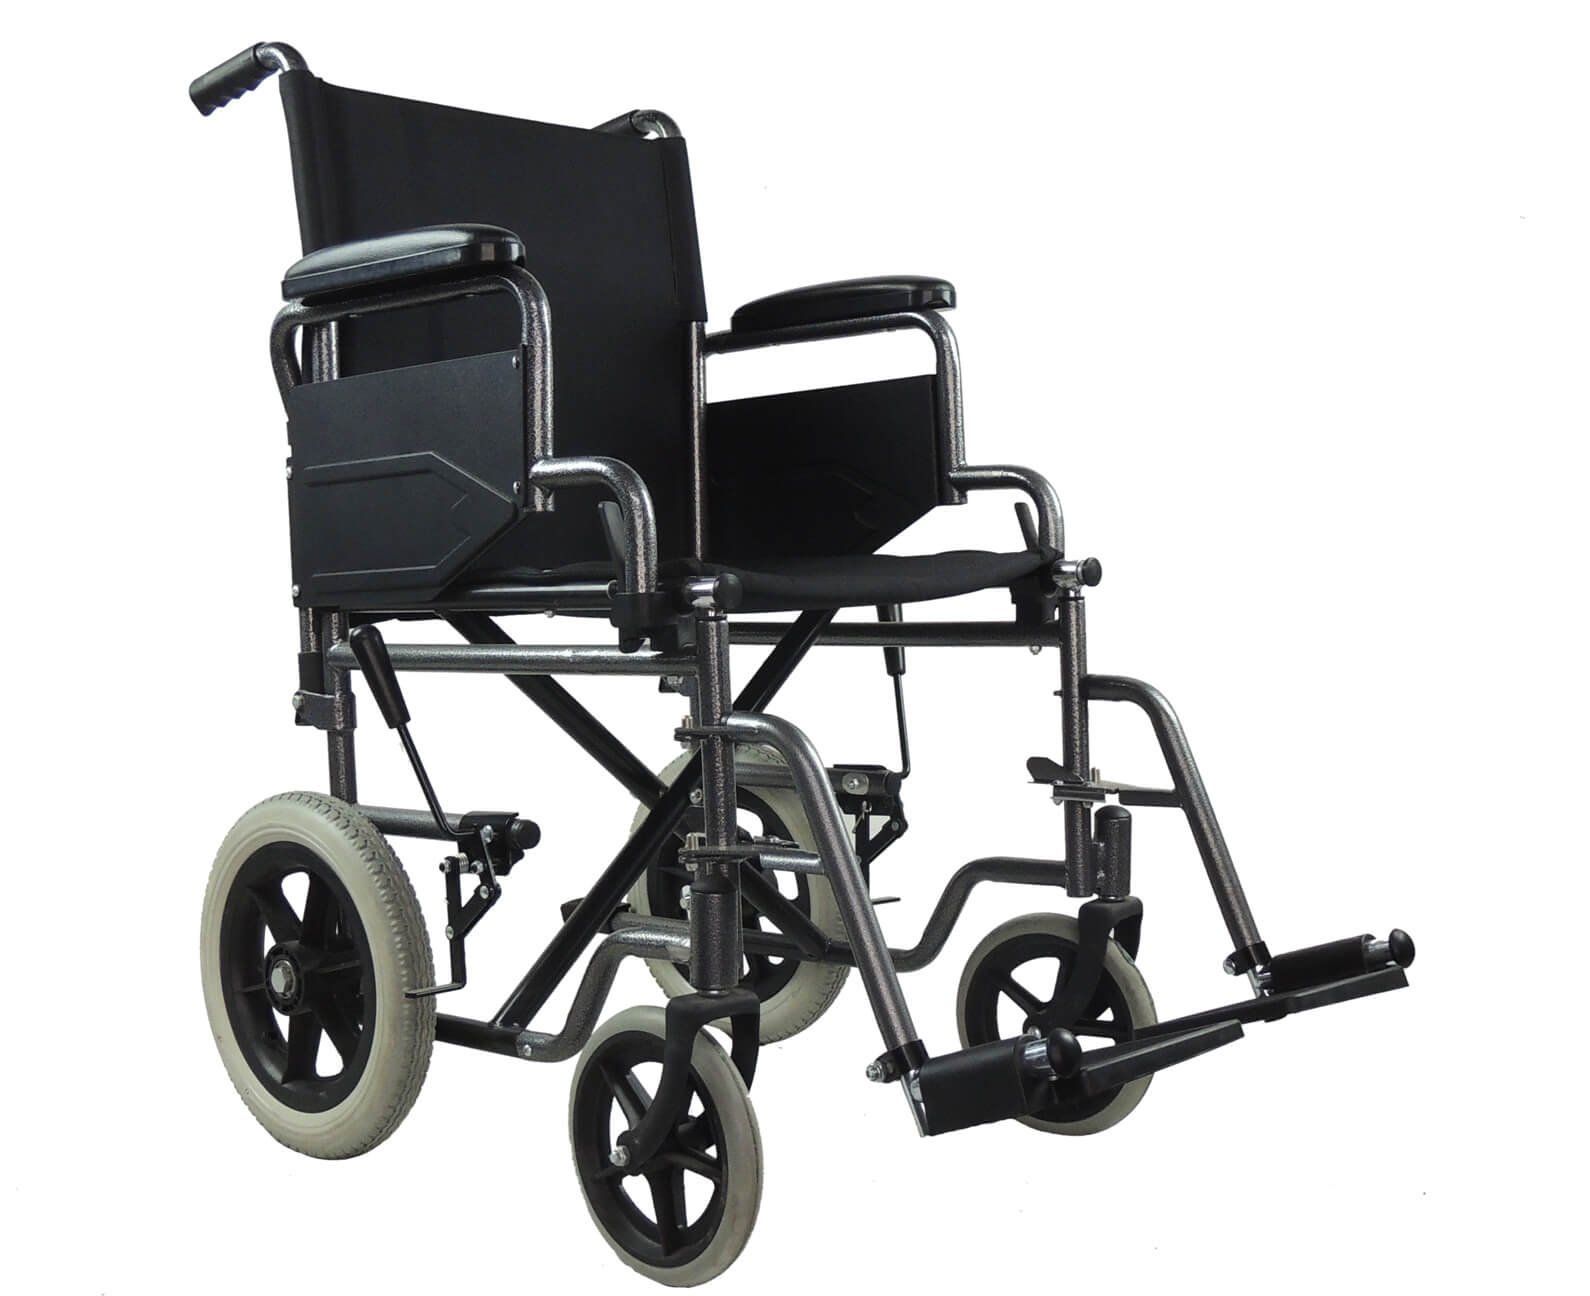 Car Transit Wheelchair - Medipost - Lightweight and Puncture Proof